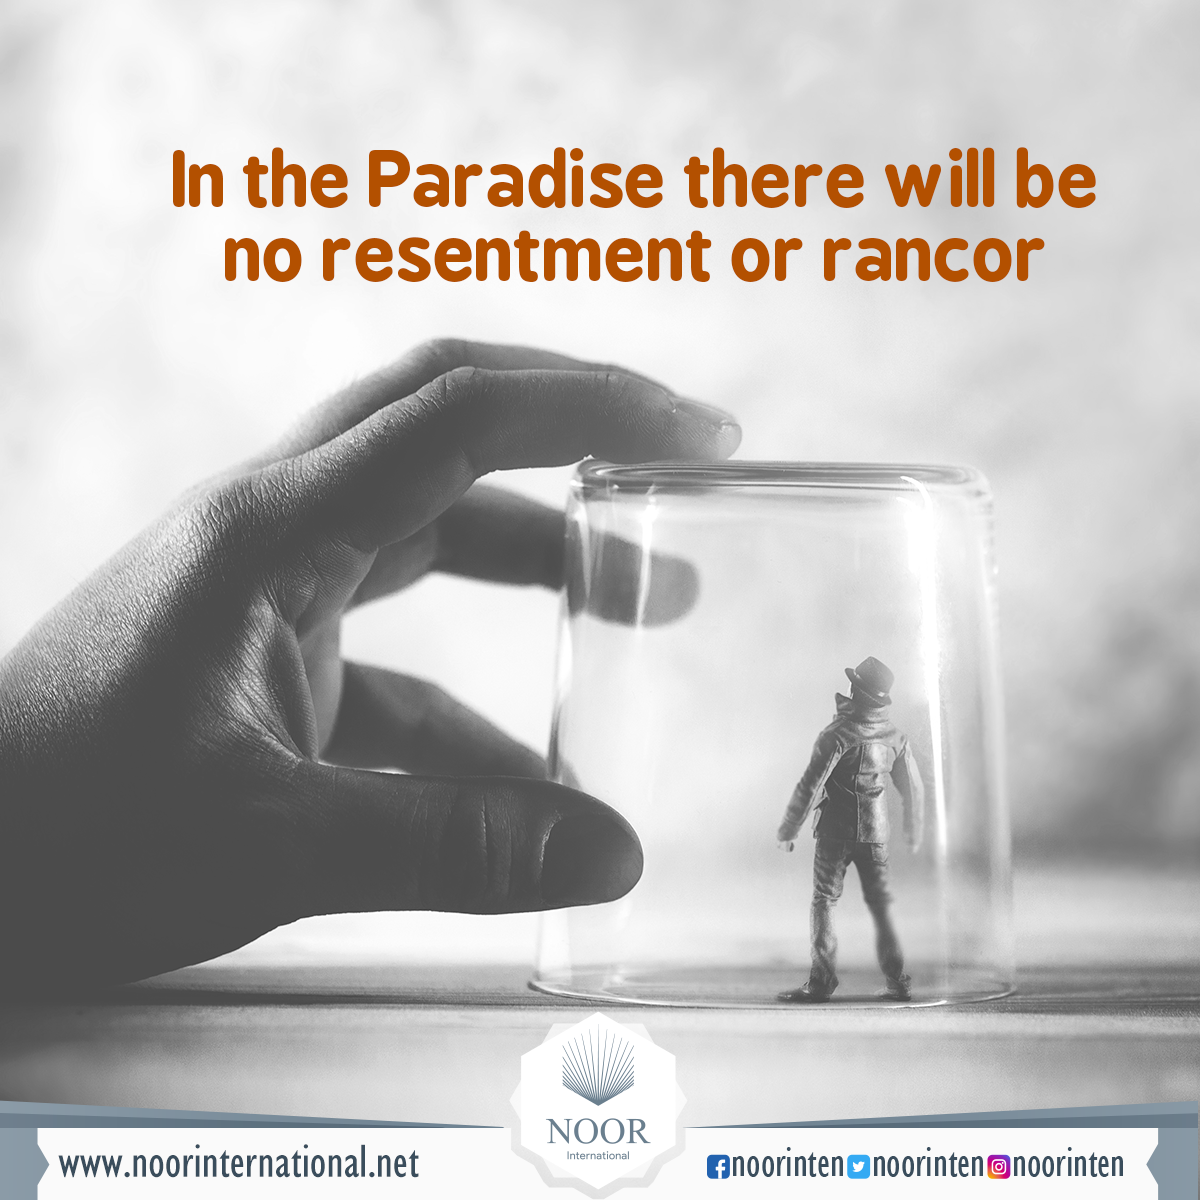 In the Paradise there will be no resentment or rancor